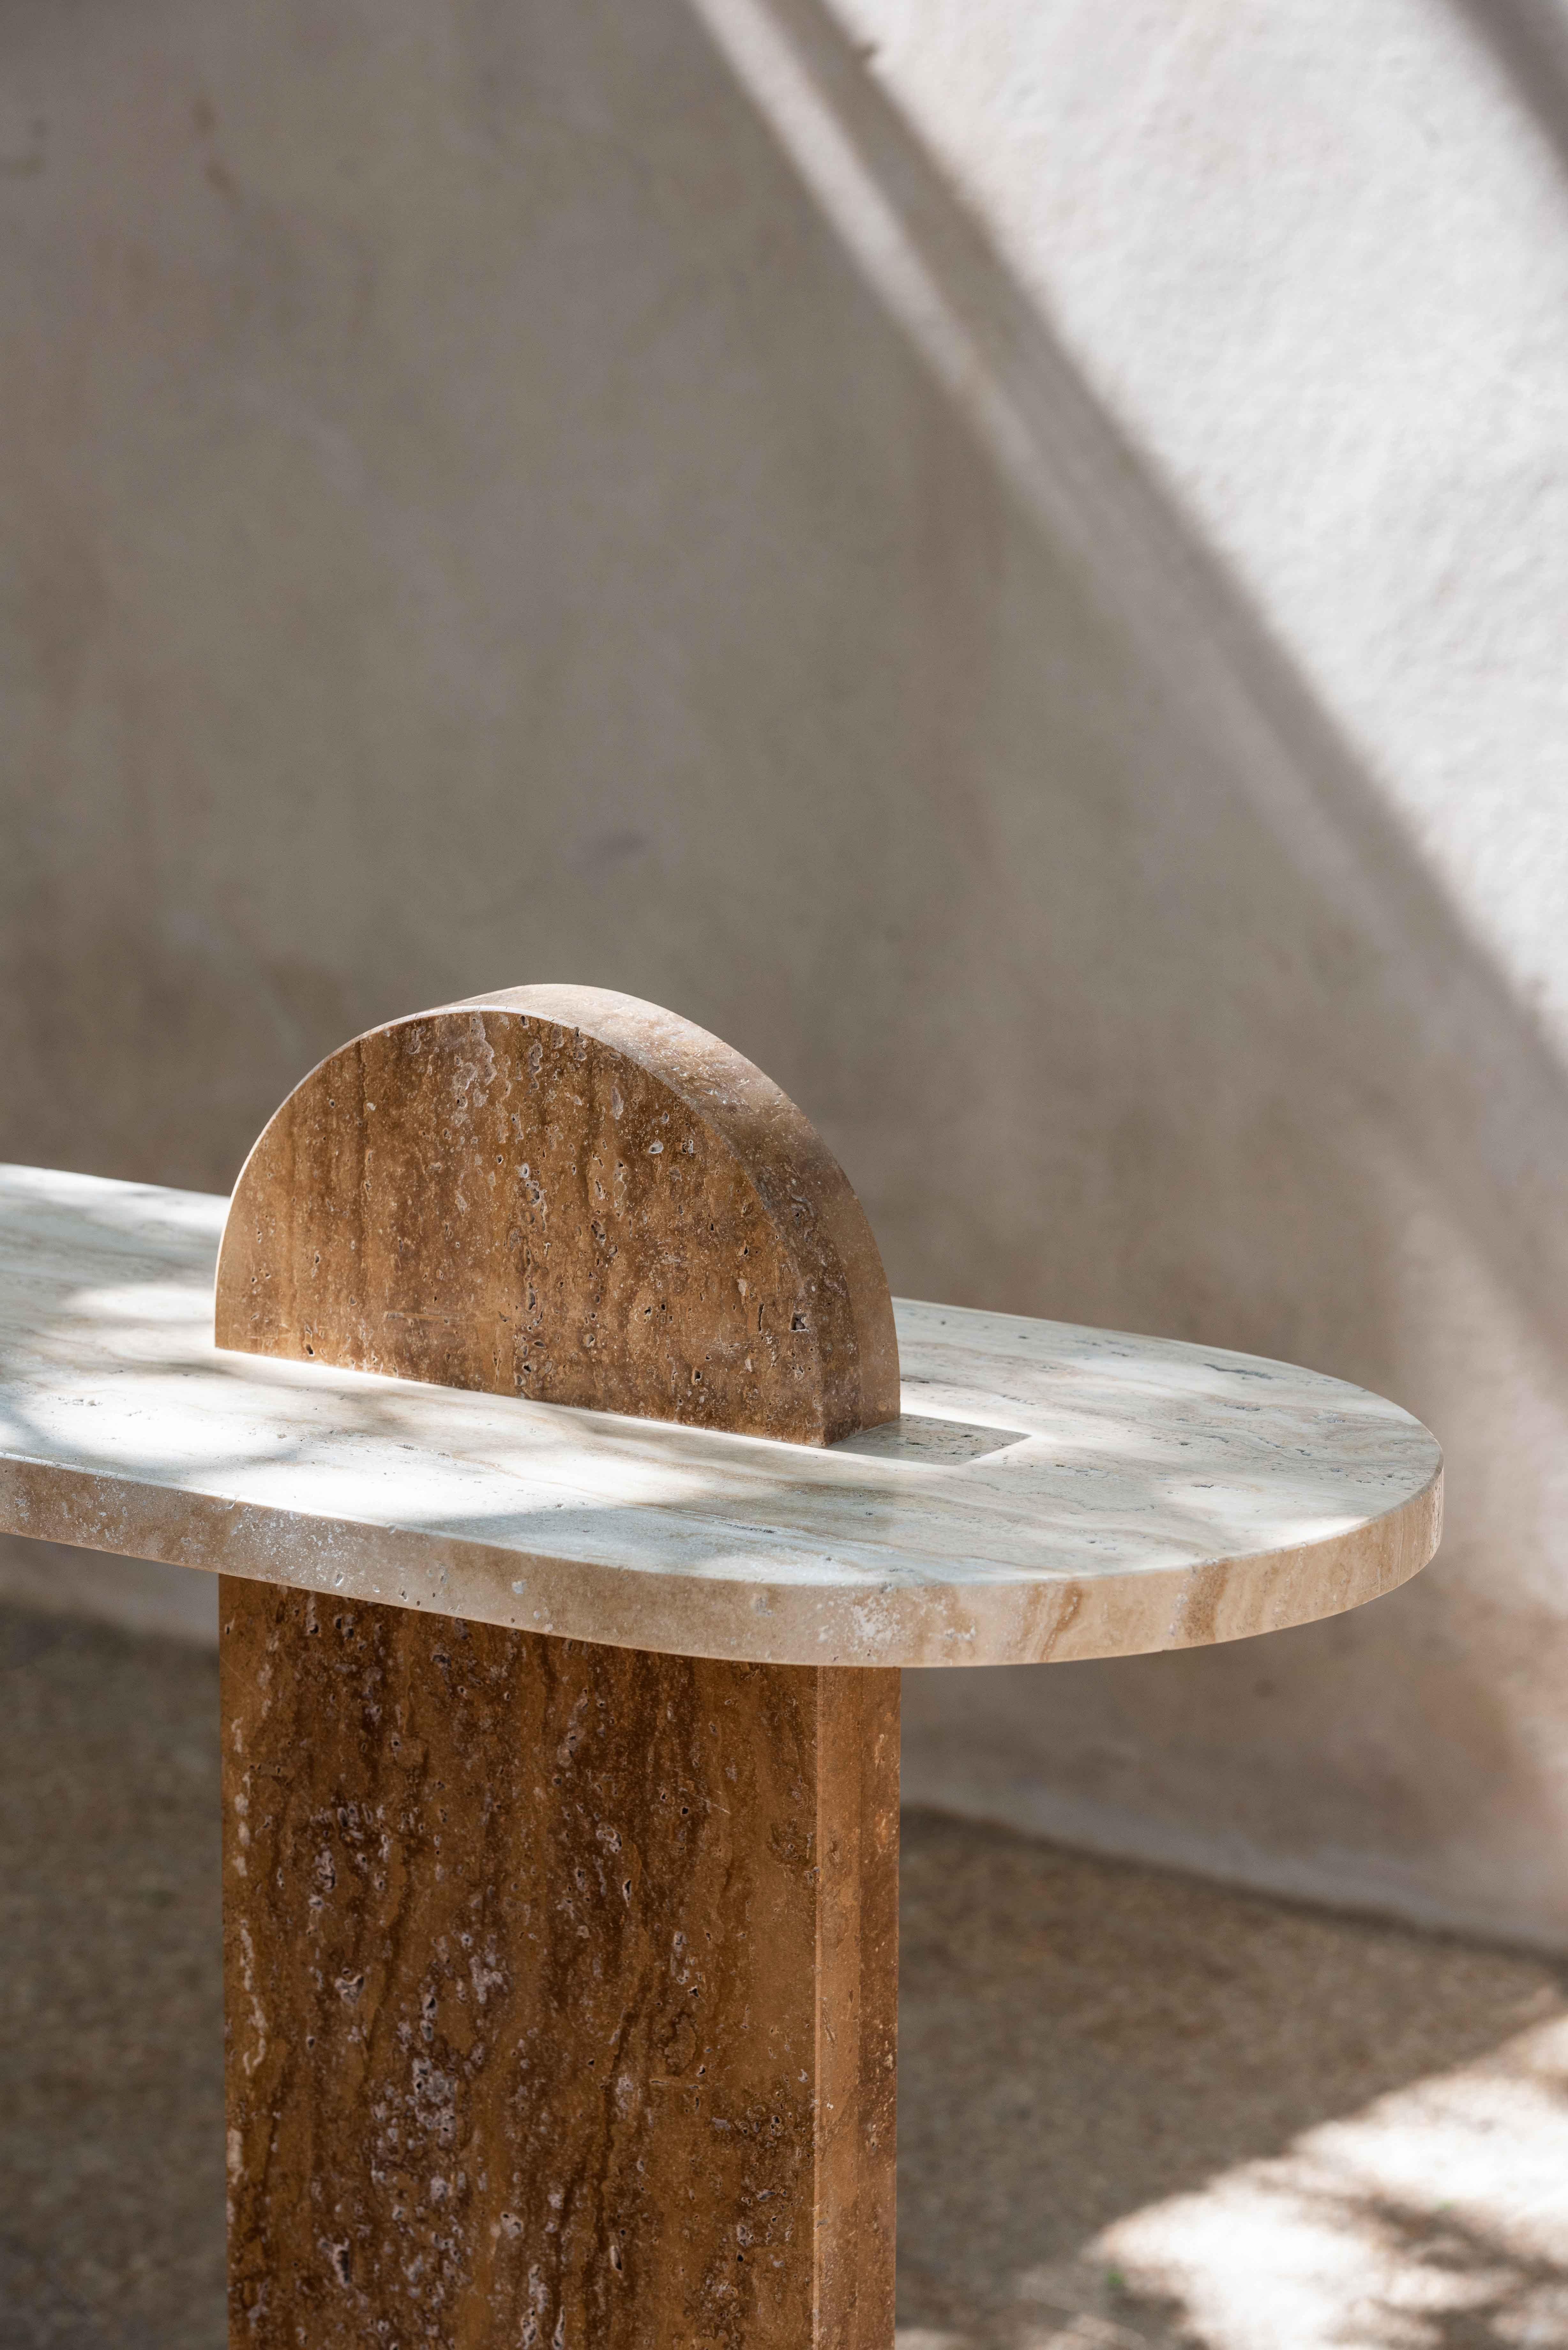 Gol. 002 marble console table by Chapter Studio
Dimensions: H 86 x W 40 x D 160
Material: marble (beige travertine, dark emperador)

Effortless composition and eccentric design bring forth the Golestan Series. Evoking rich emotions of heritage and